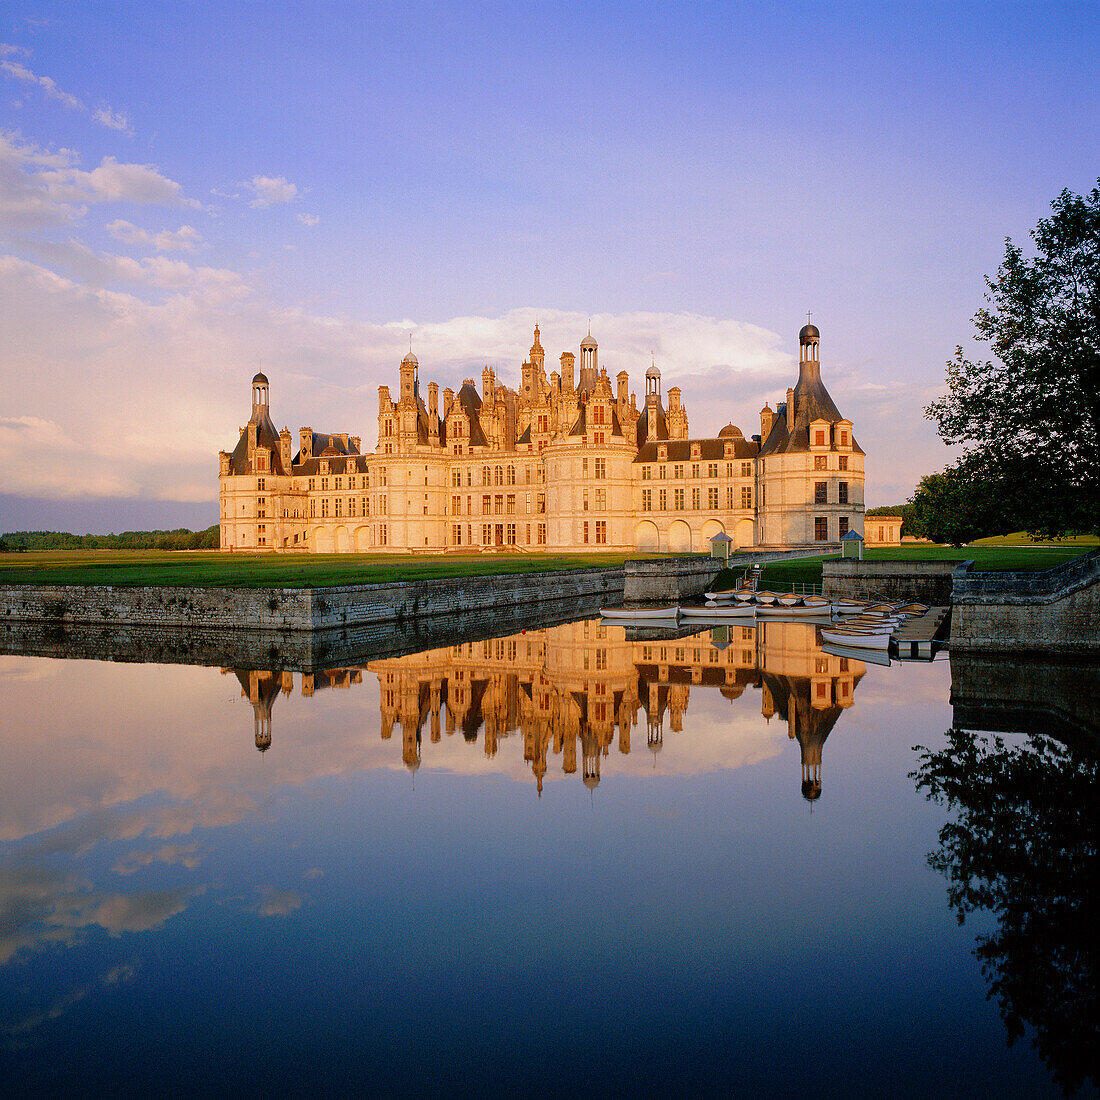 DAYTIME VIEW OF THE CHATEAU, CHATEAU DE CHAMBORD, The Loire, FRANCE